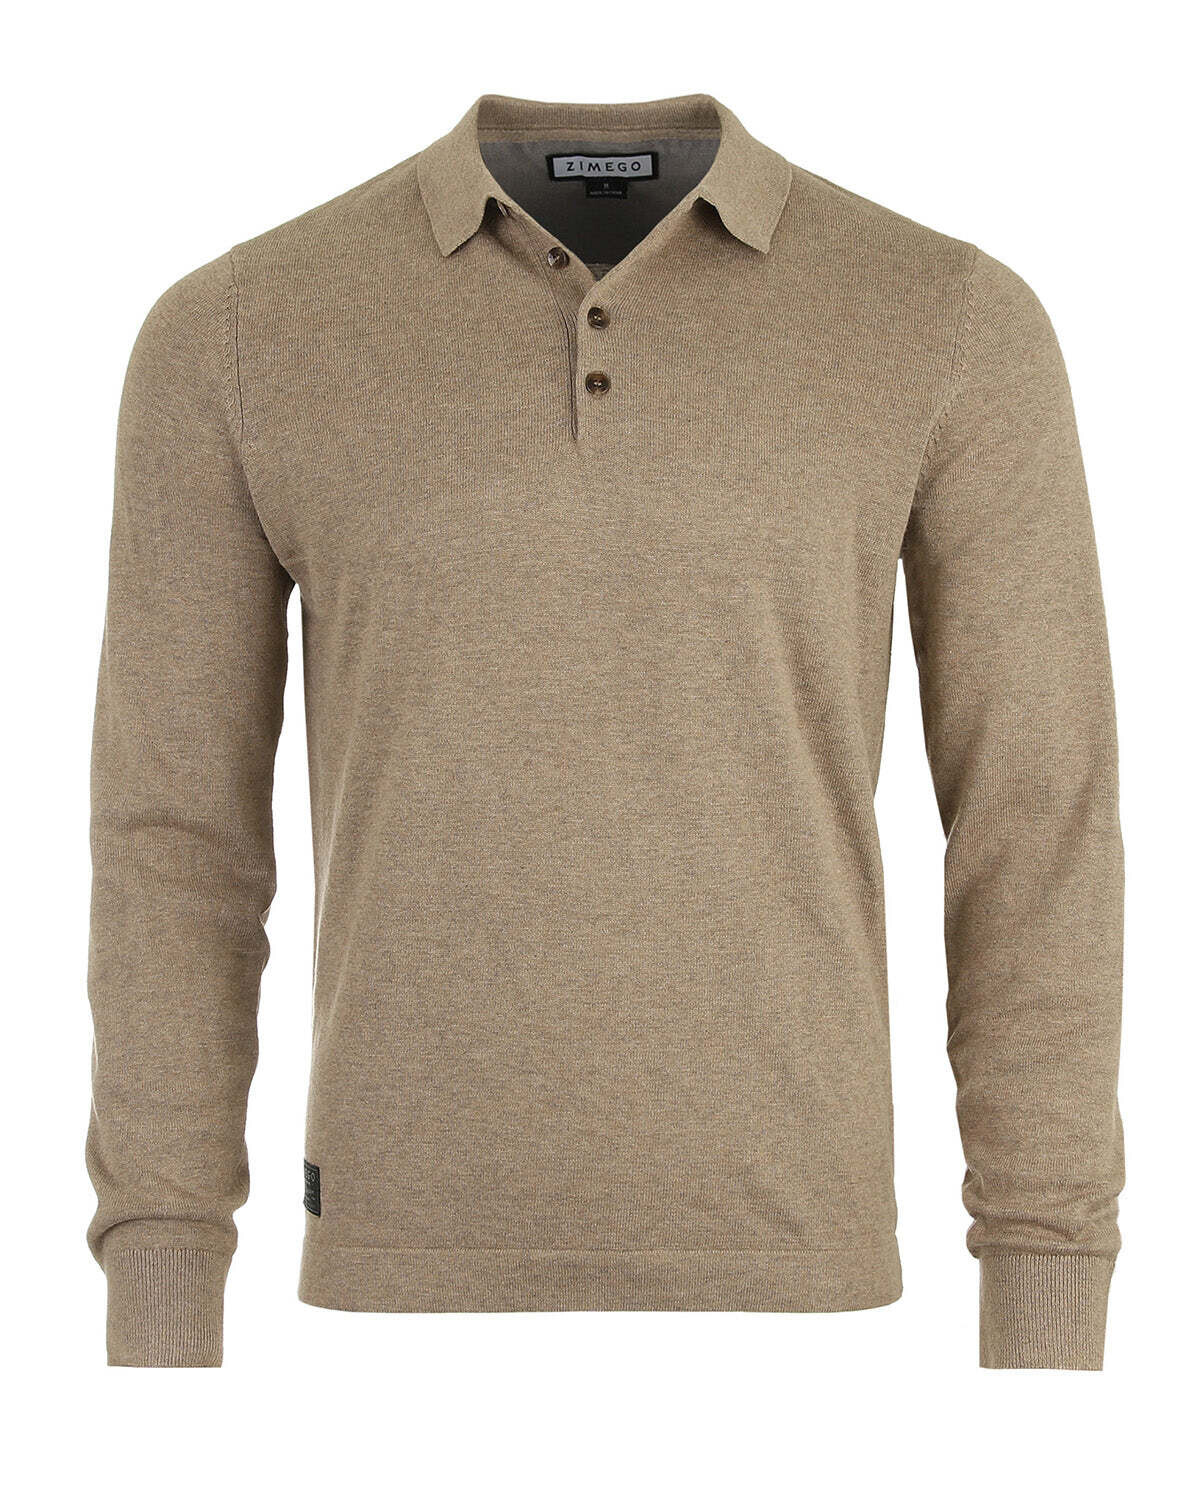 ZIMEGO Men's Casual Polo Sweater - Long Sleeve Pullover Button Knit Shirt